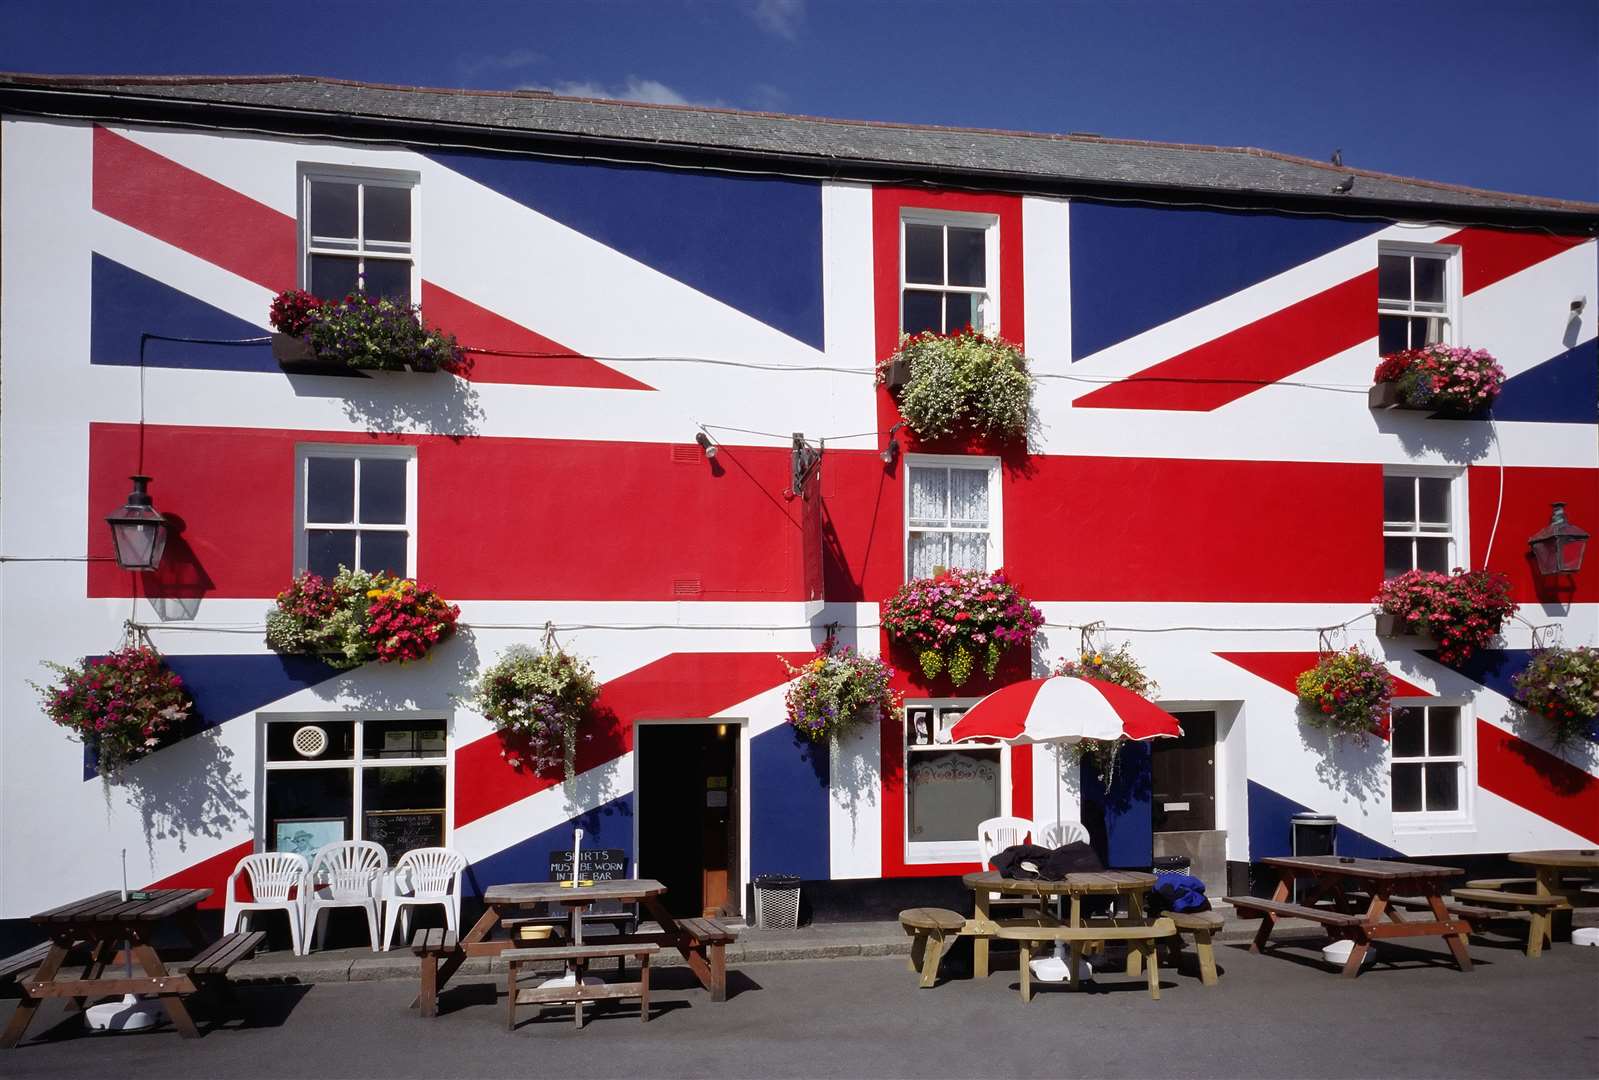 In recent times the great British pub has had to adapt to survive